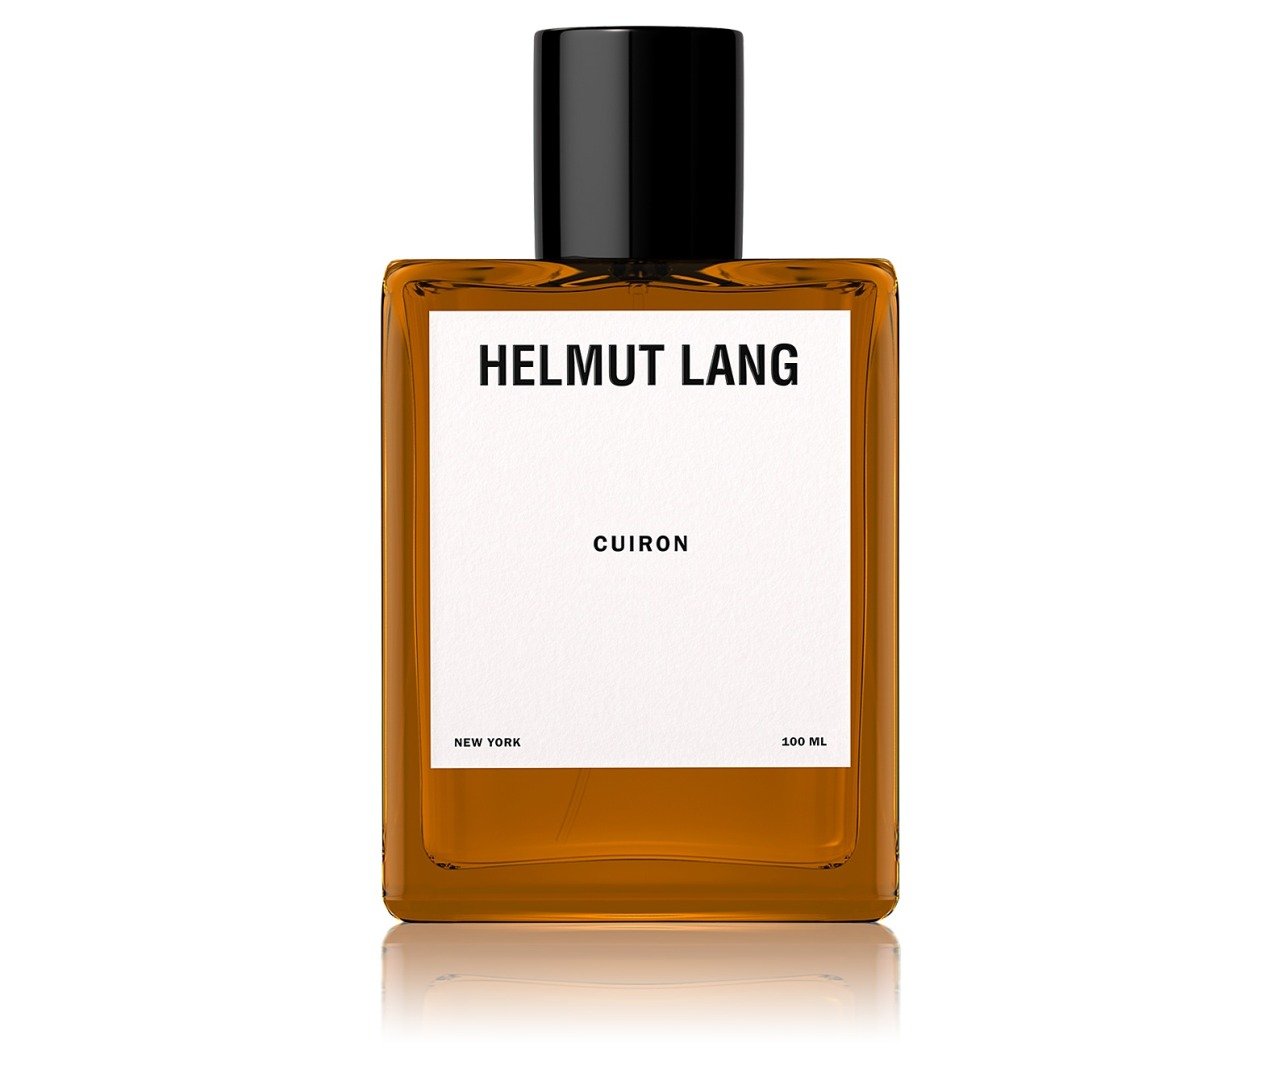 Helmut Lang Cuiron, 3.3 oz Cologne Spray